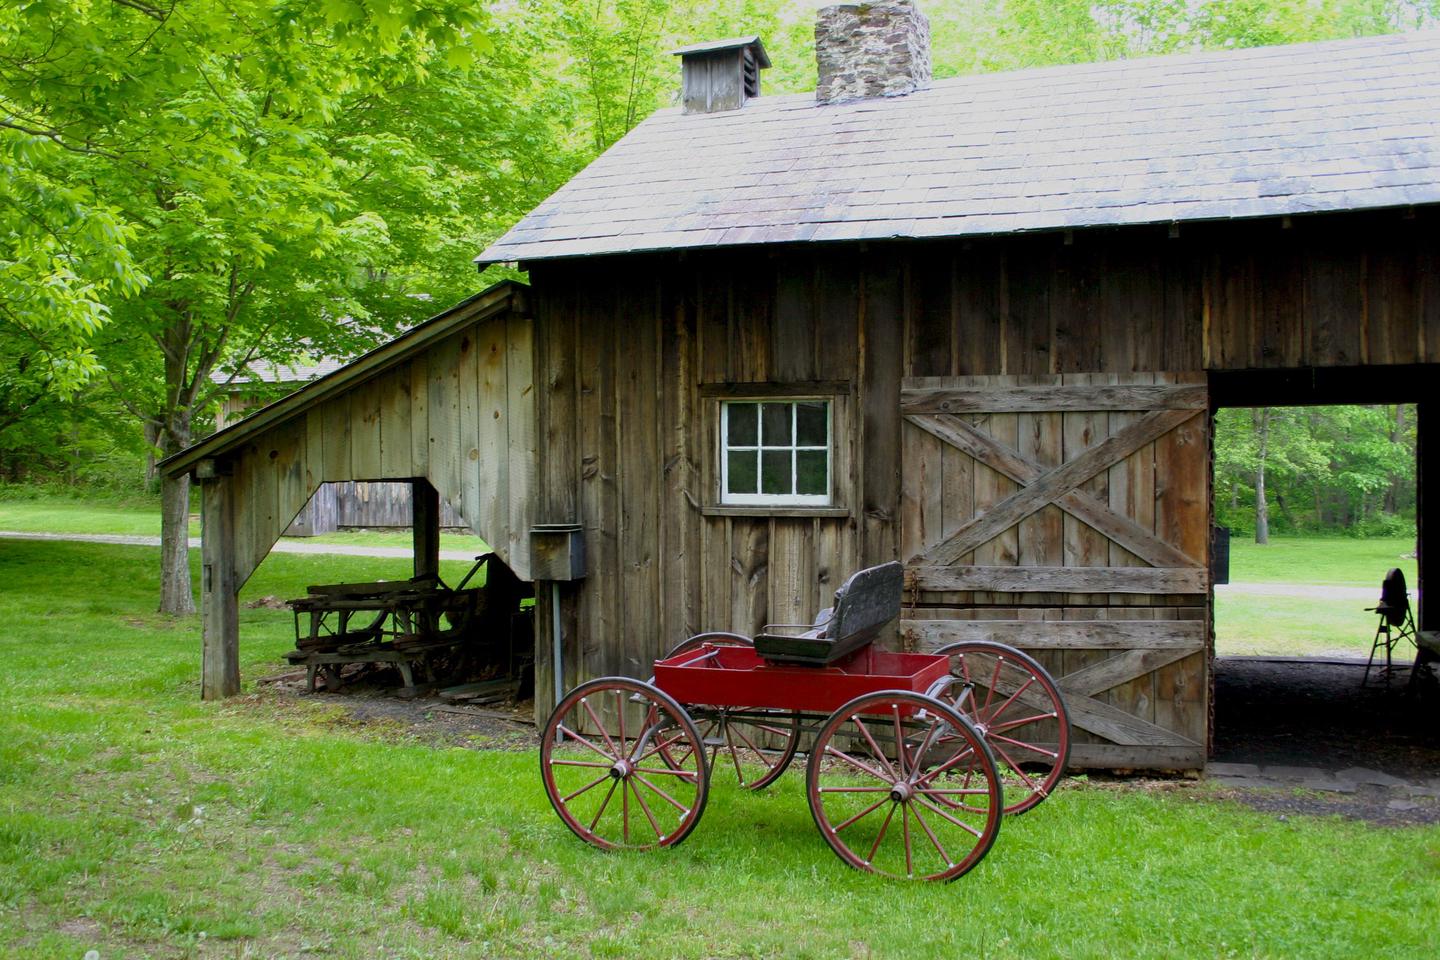 Carriage at Millbrook VillageCarriage parked in front of Millbrook Village's Blacksmith Shop.